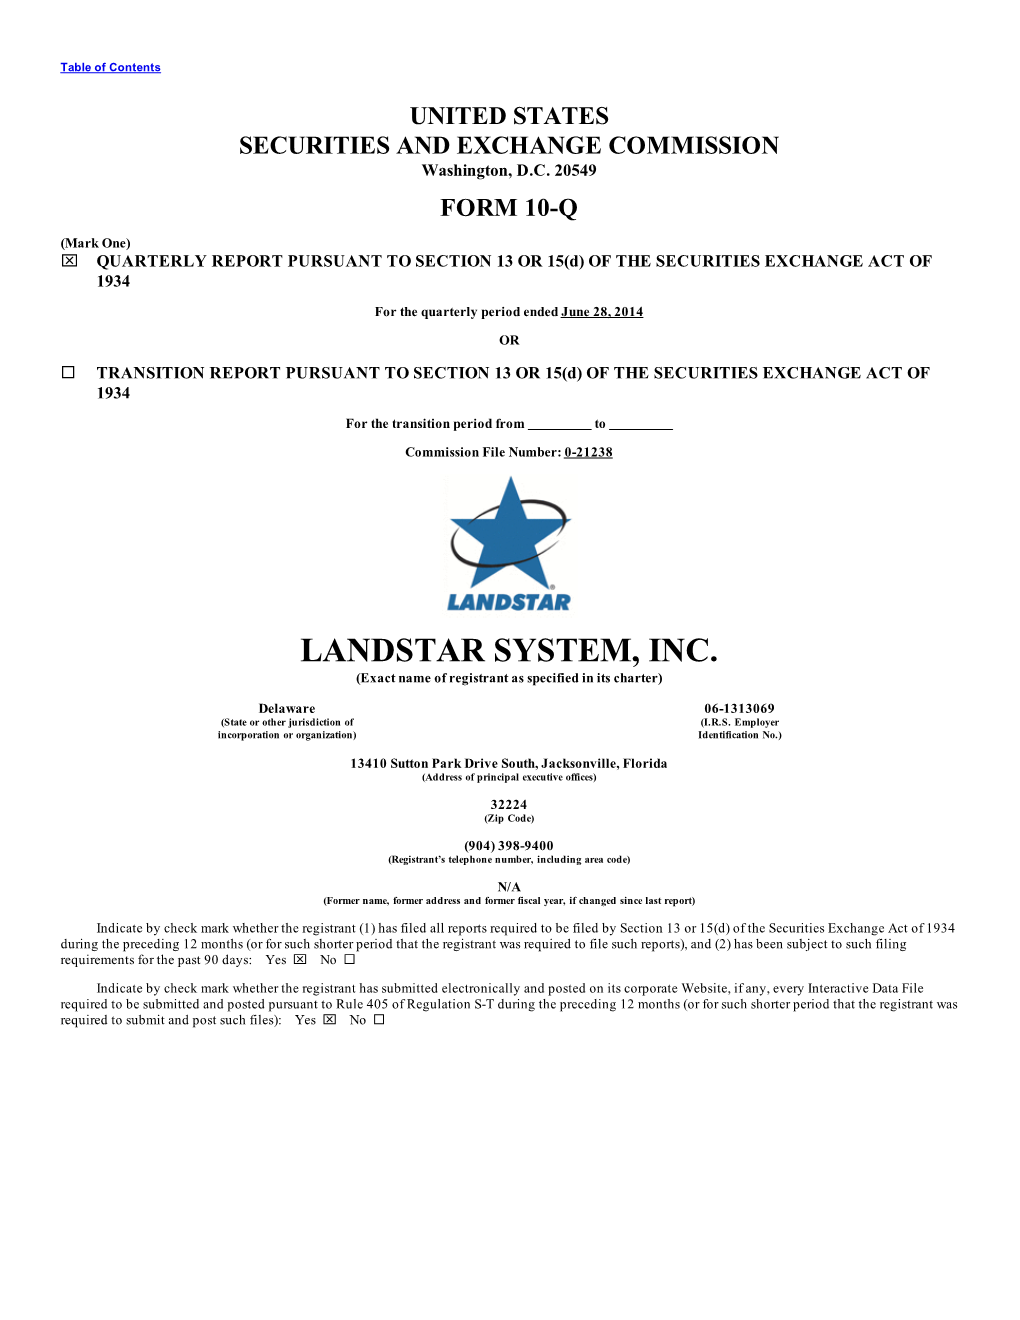 LANDSTAR SYSTEM, INC. (Exact Name of Registrant As Specified in Its Charter)